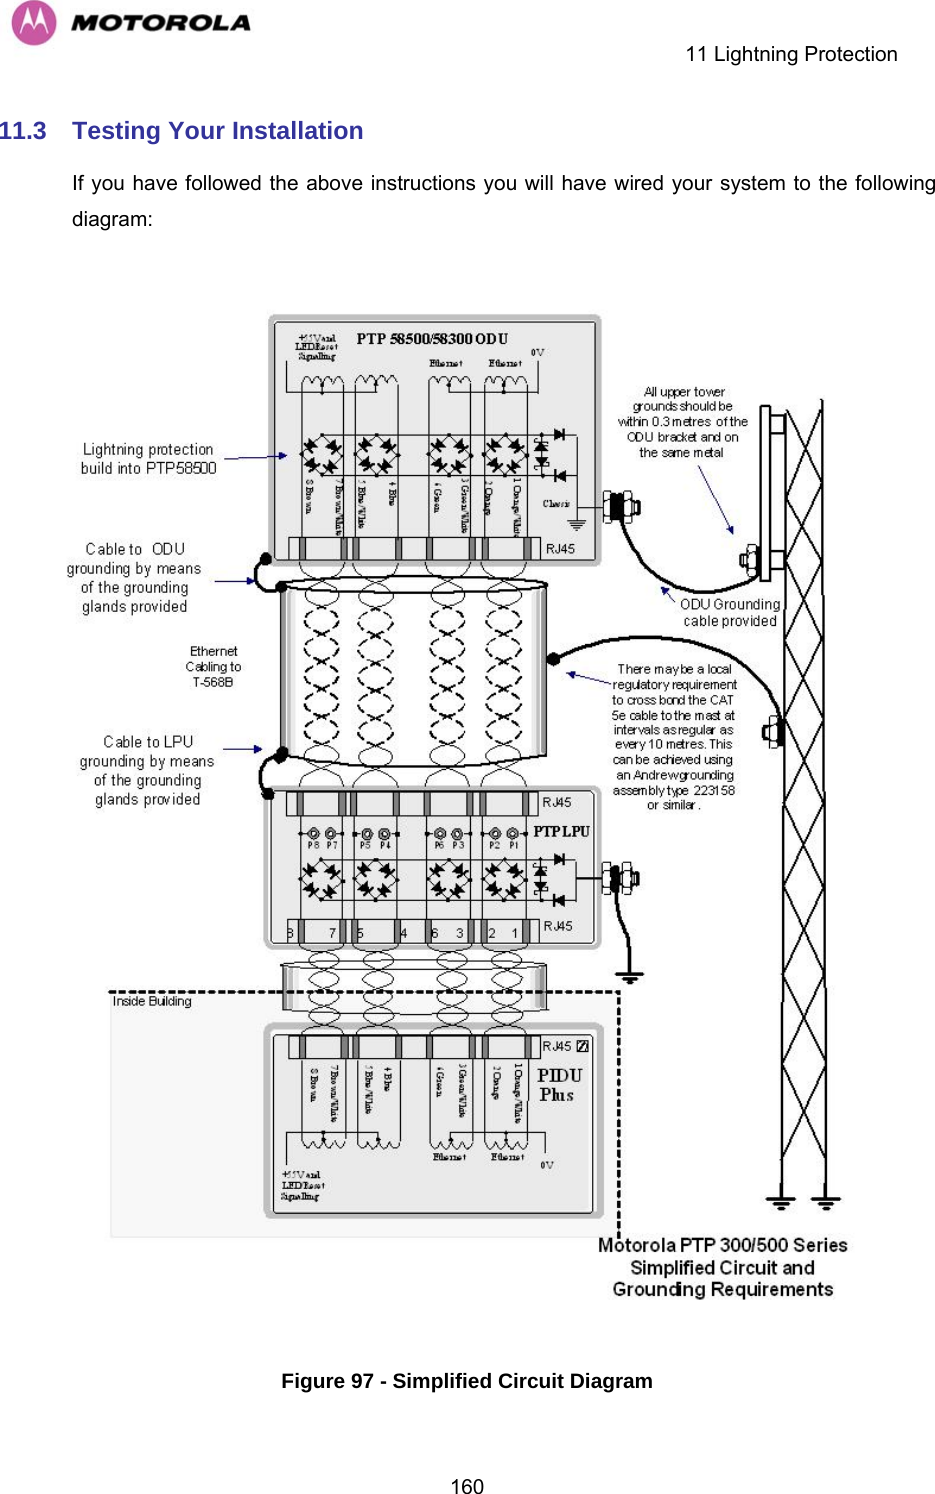    11 Lightning Protection  16011.3  Testing Your Installation If you have followed the above instructions you will have wired your system to the following diagram:  Figure 97 - Simplified Circuit Diagram 